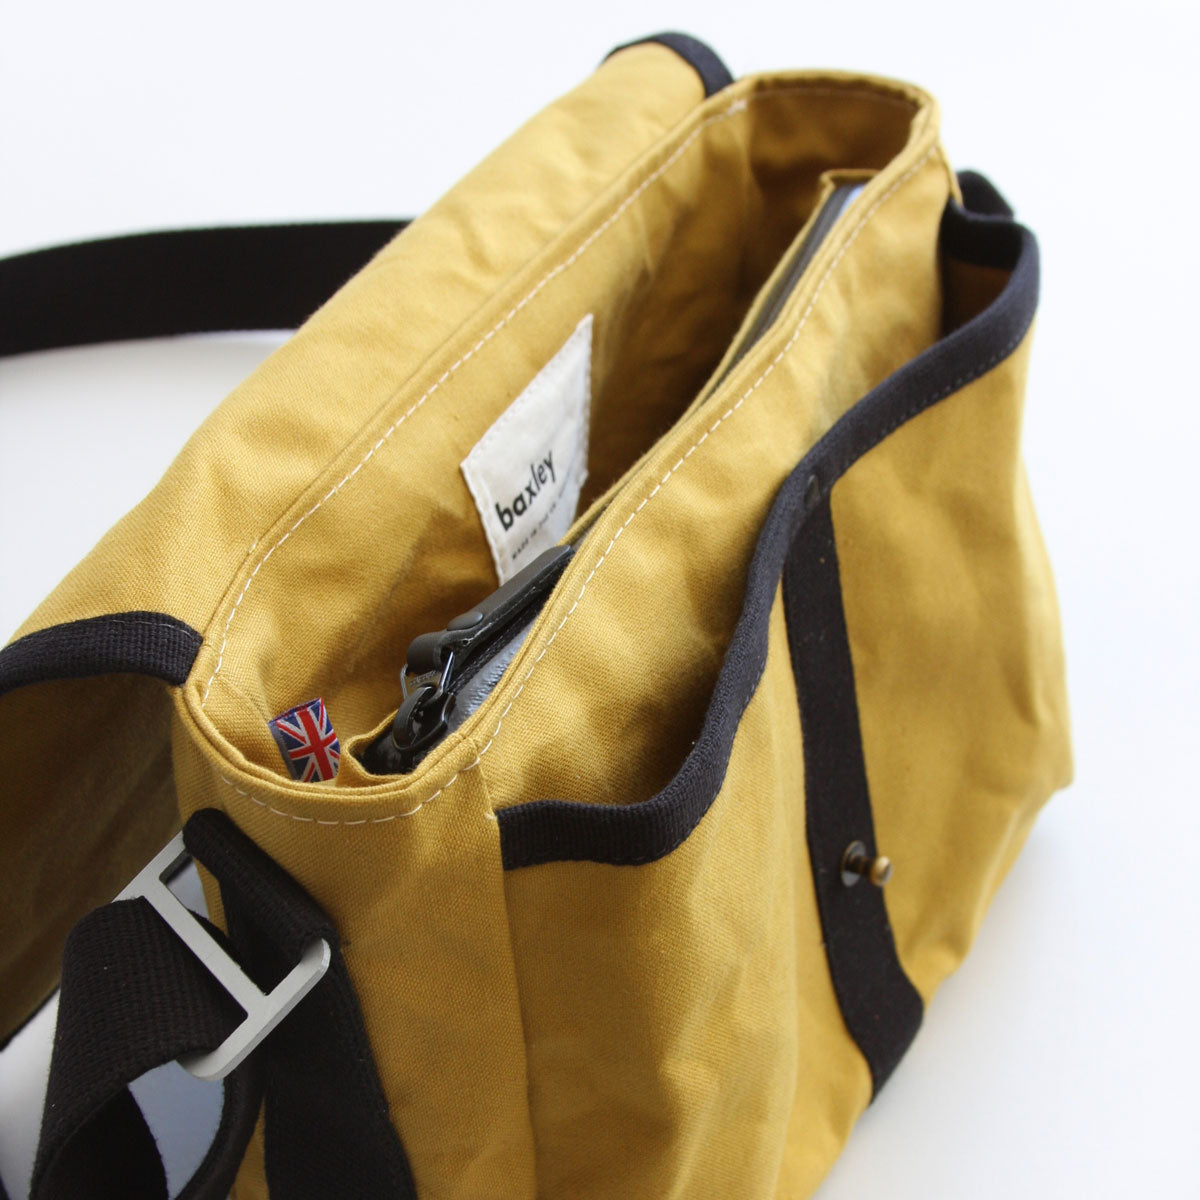 Interior view of Gertie the crossbody satchel from Baxley in cumin and black. A zippered pocket and two drop pockets are visible, as is a made-in-uk flag.